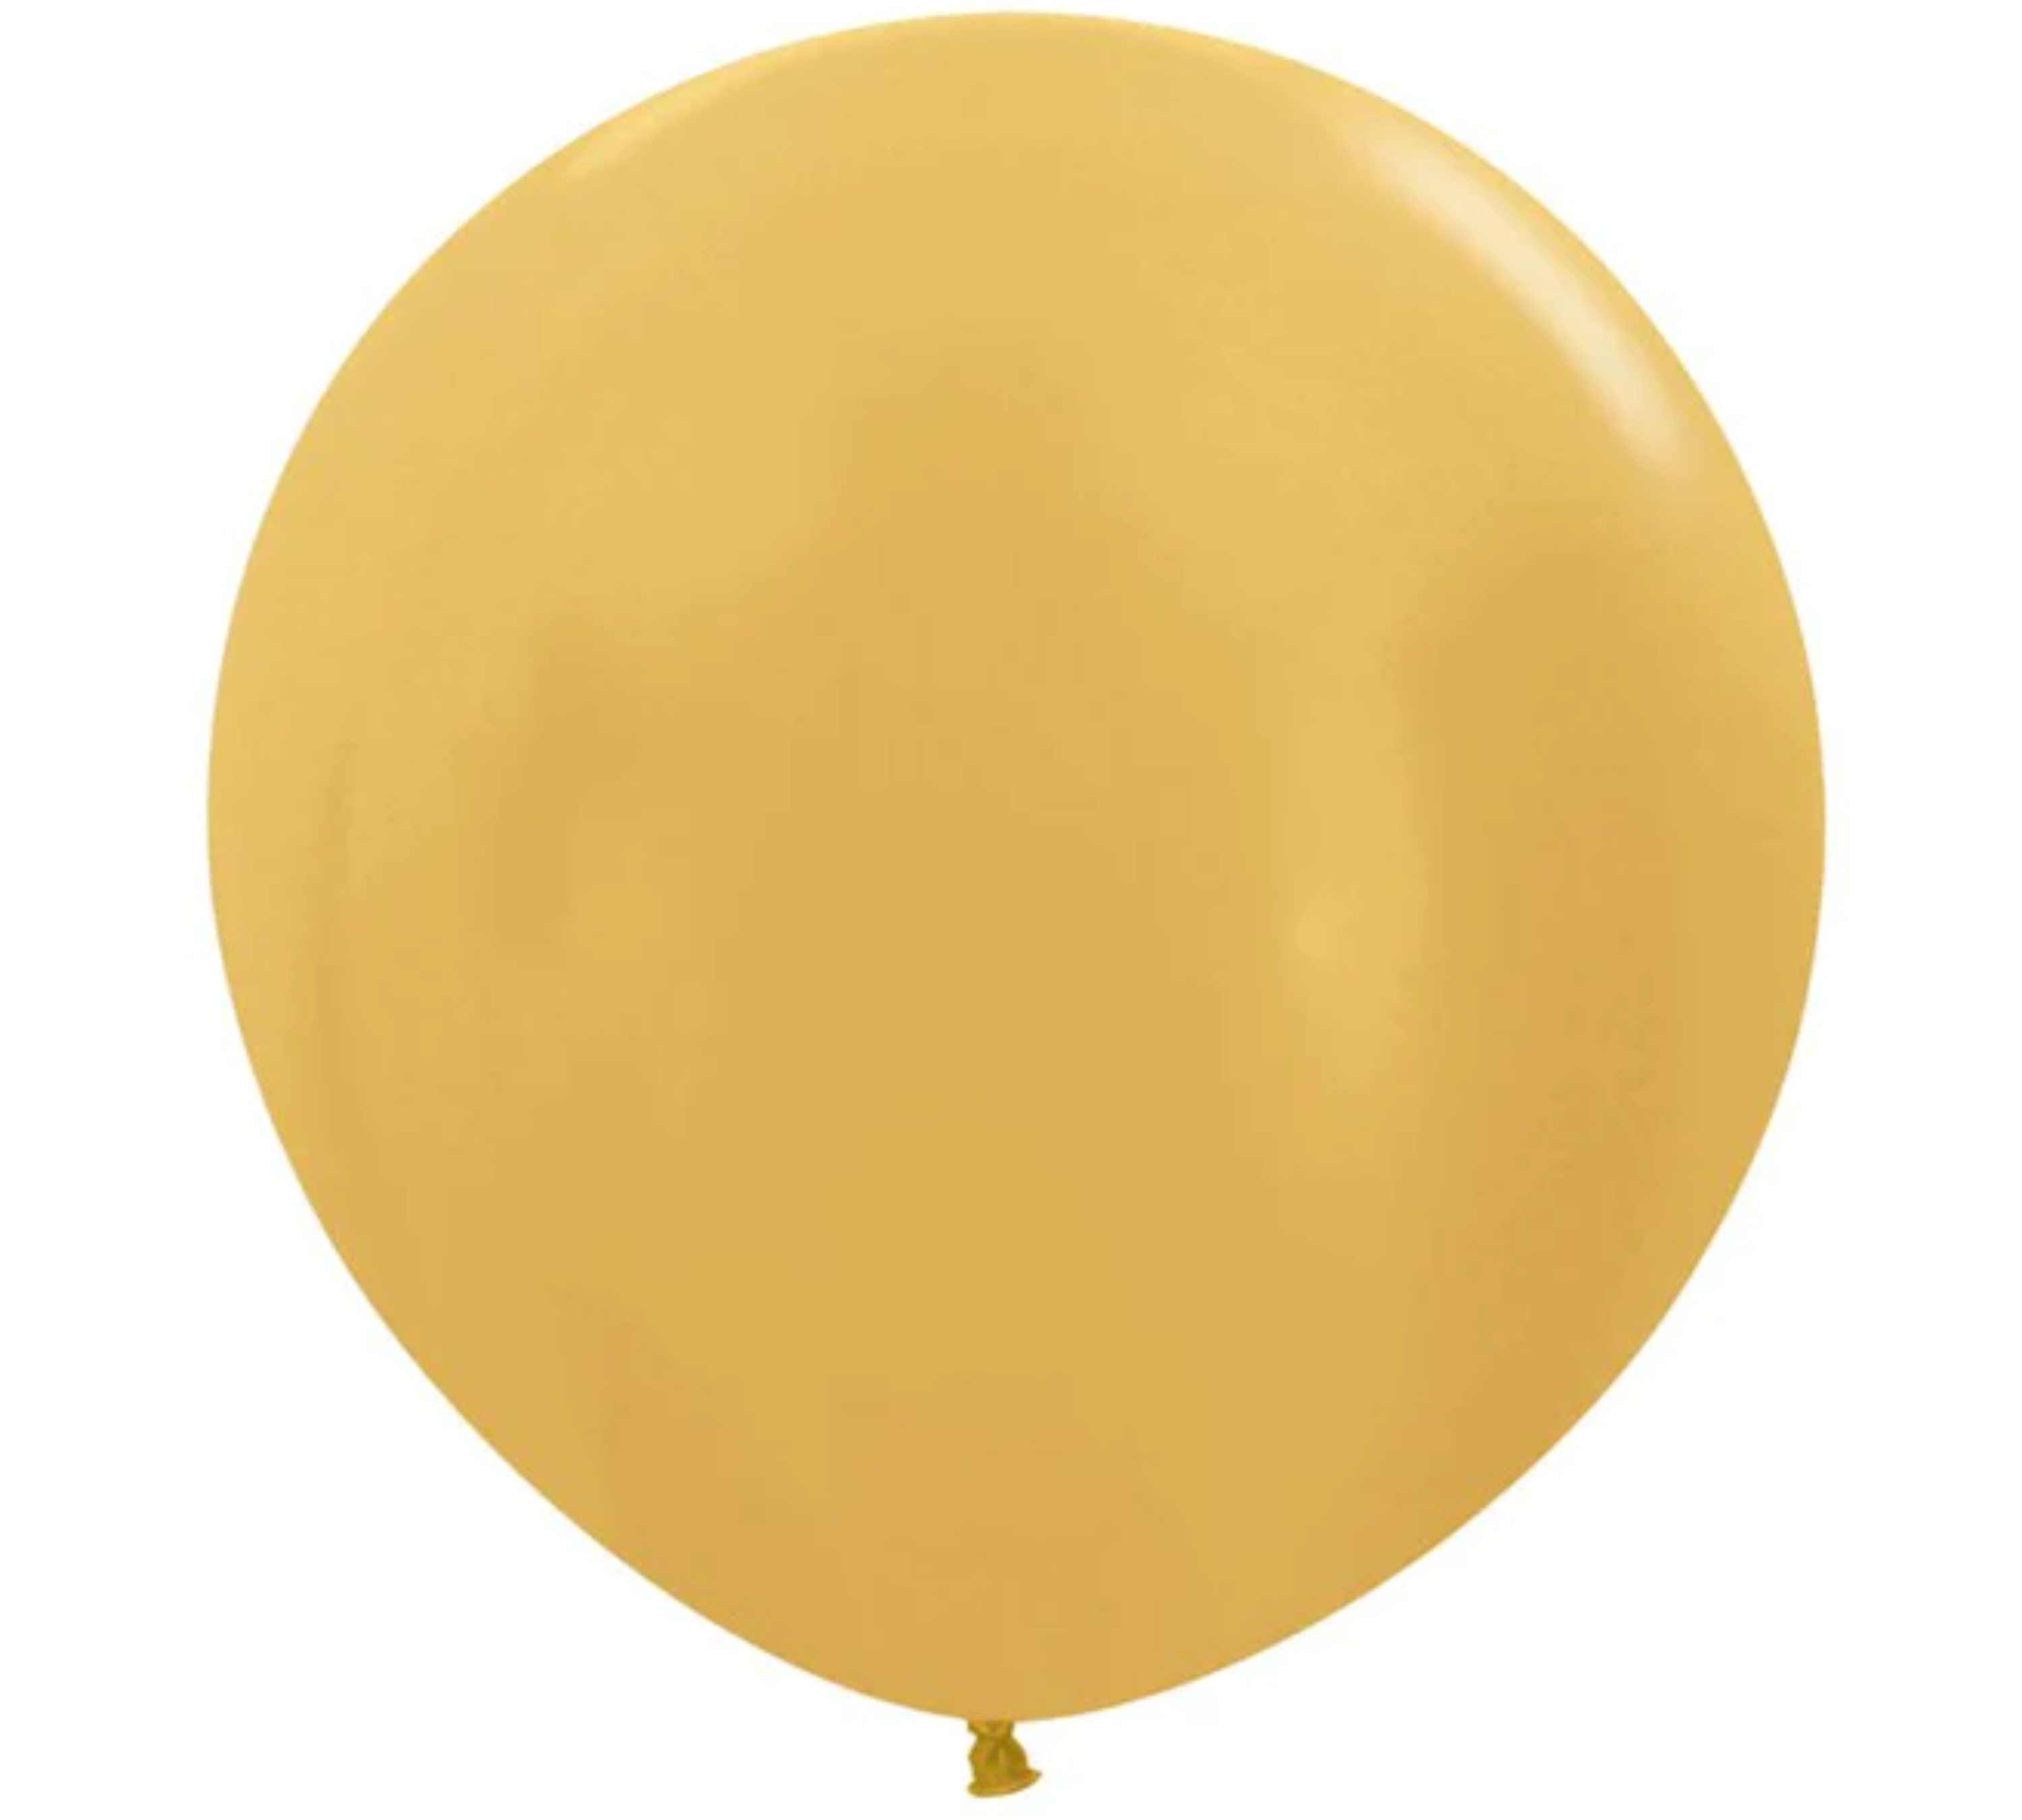 36" Sempertex Metallic Pearlized Gold Latex Balloons - 3 Foot Giant | 2 Count